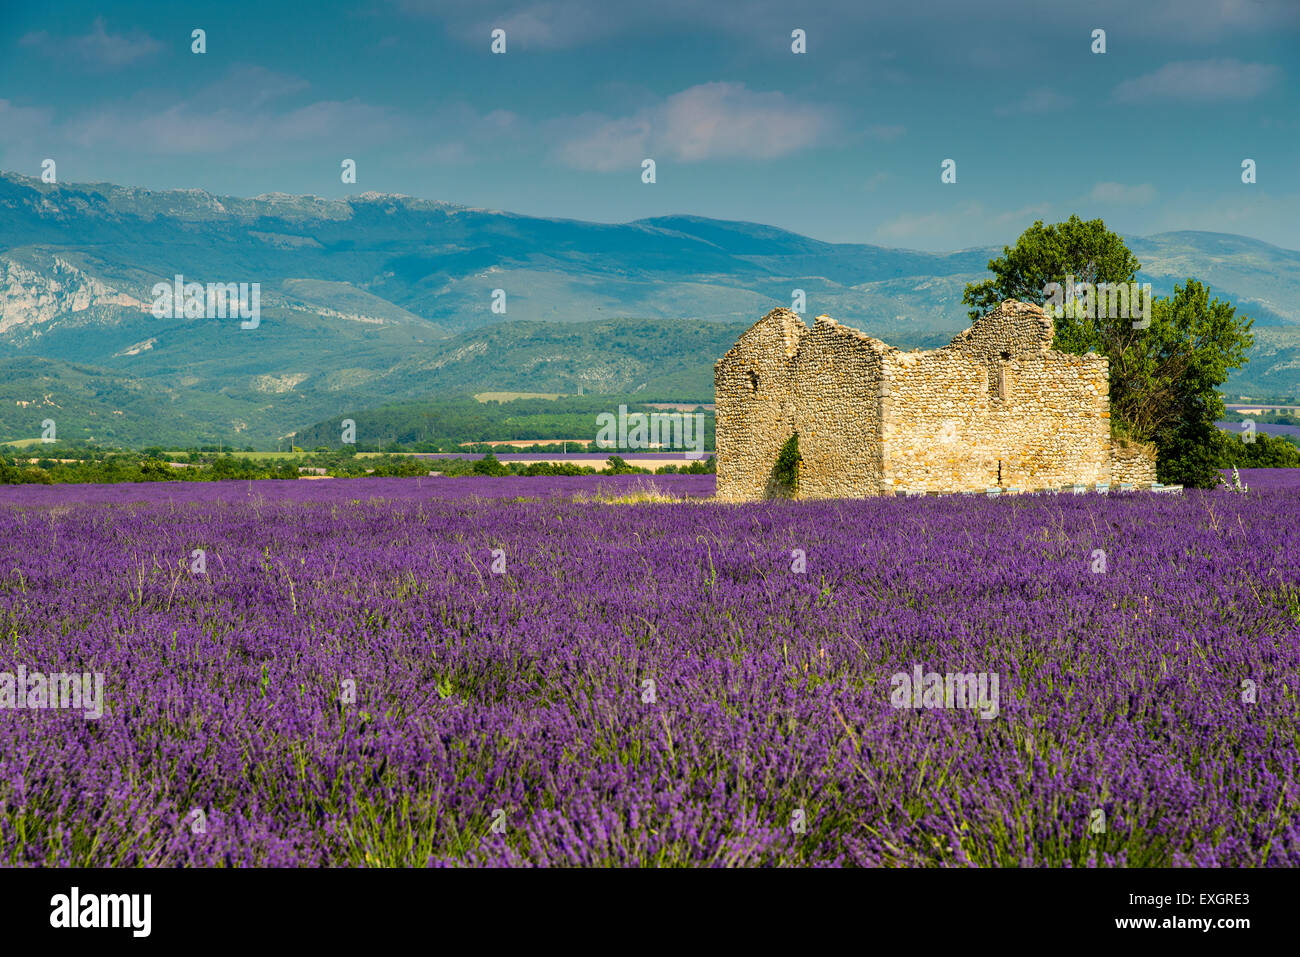 Lavender field in bloom with stone cottage at Plateau de Valensole, Provence, France Stock Photo